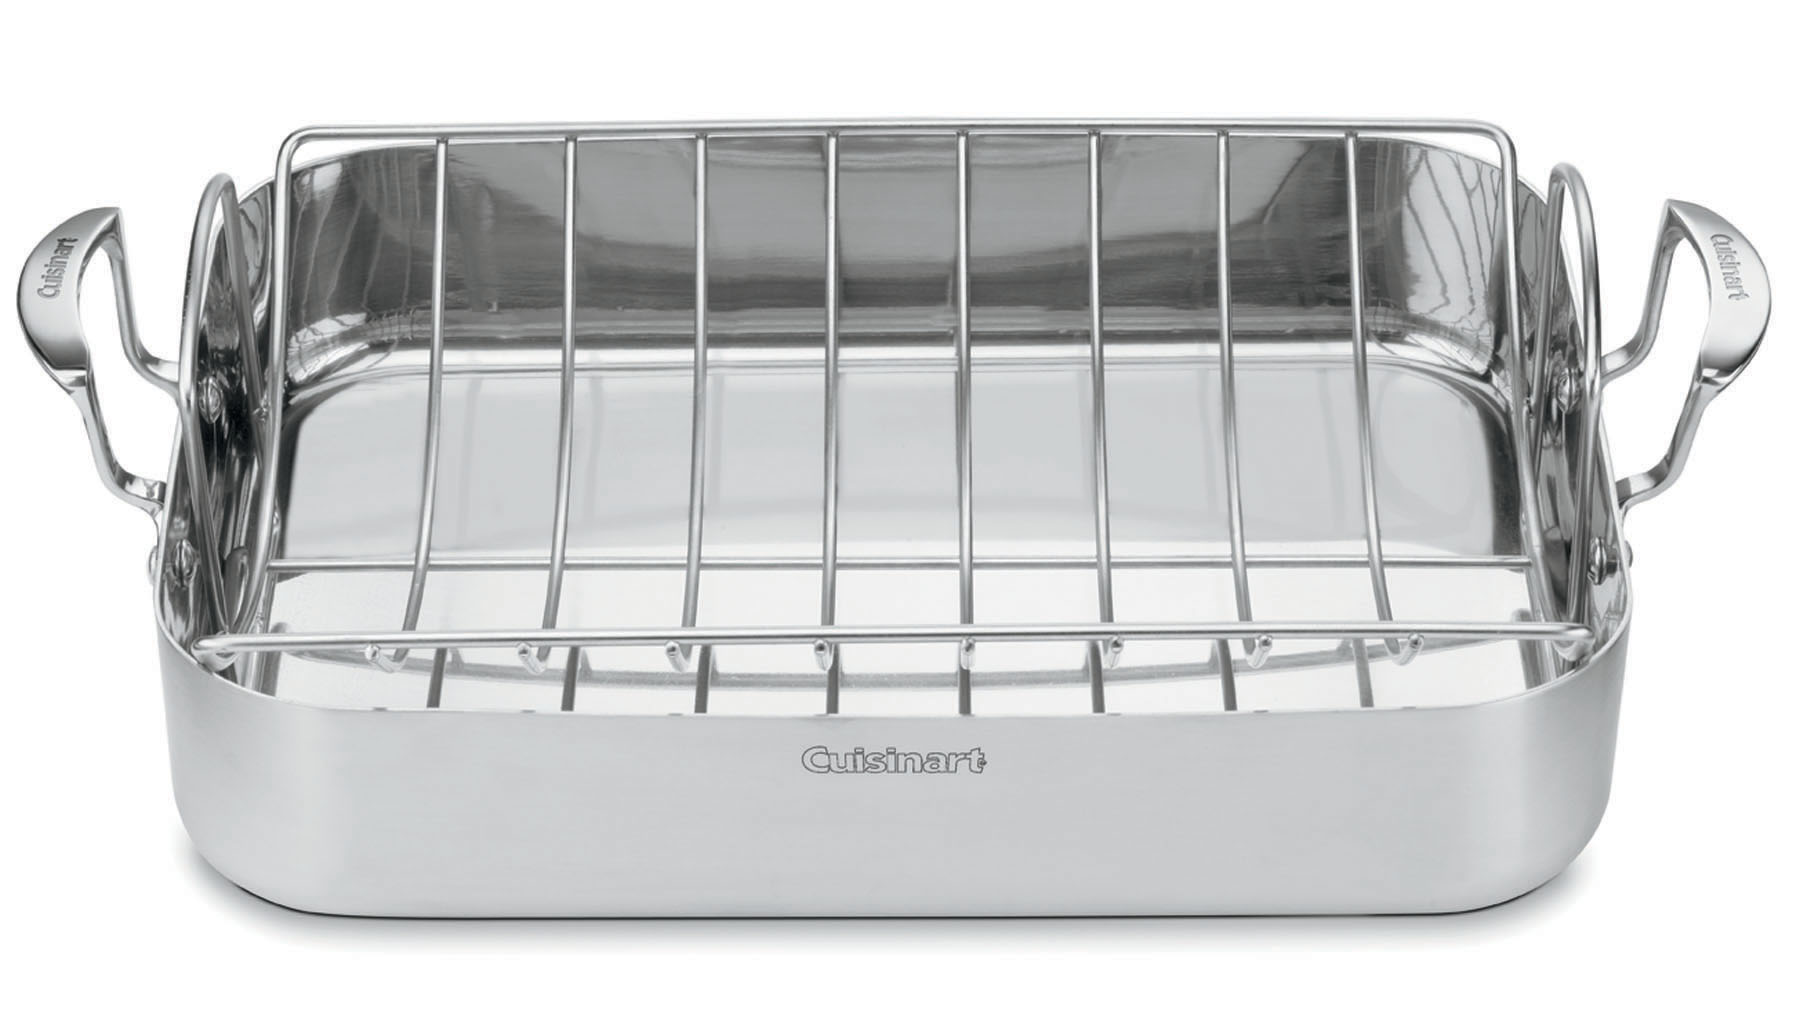 Cuisinart MultiClad Pro Stainless 16-Inch Rectangular Roasting Pan with Rack